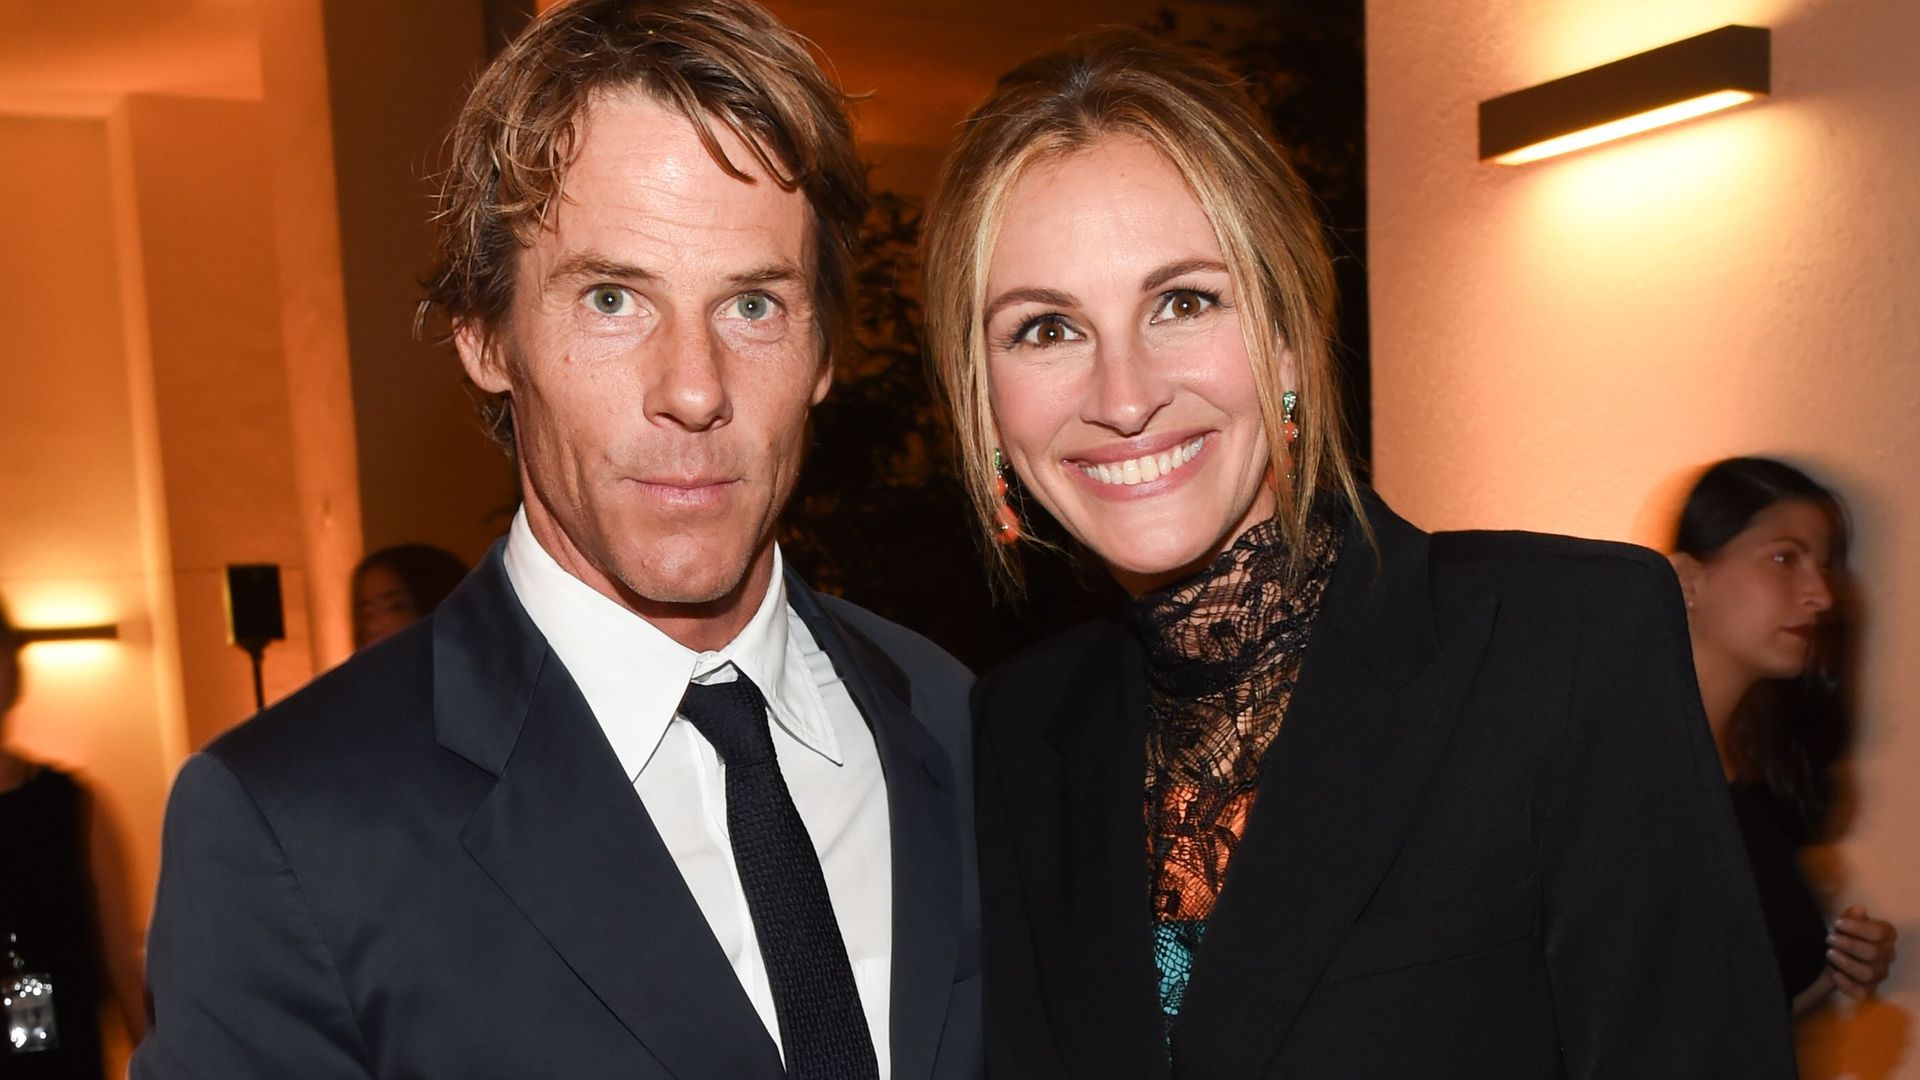 Danny Moder and Julia Roberts smiling at an event